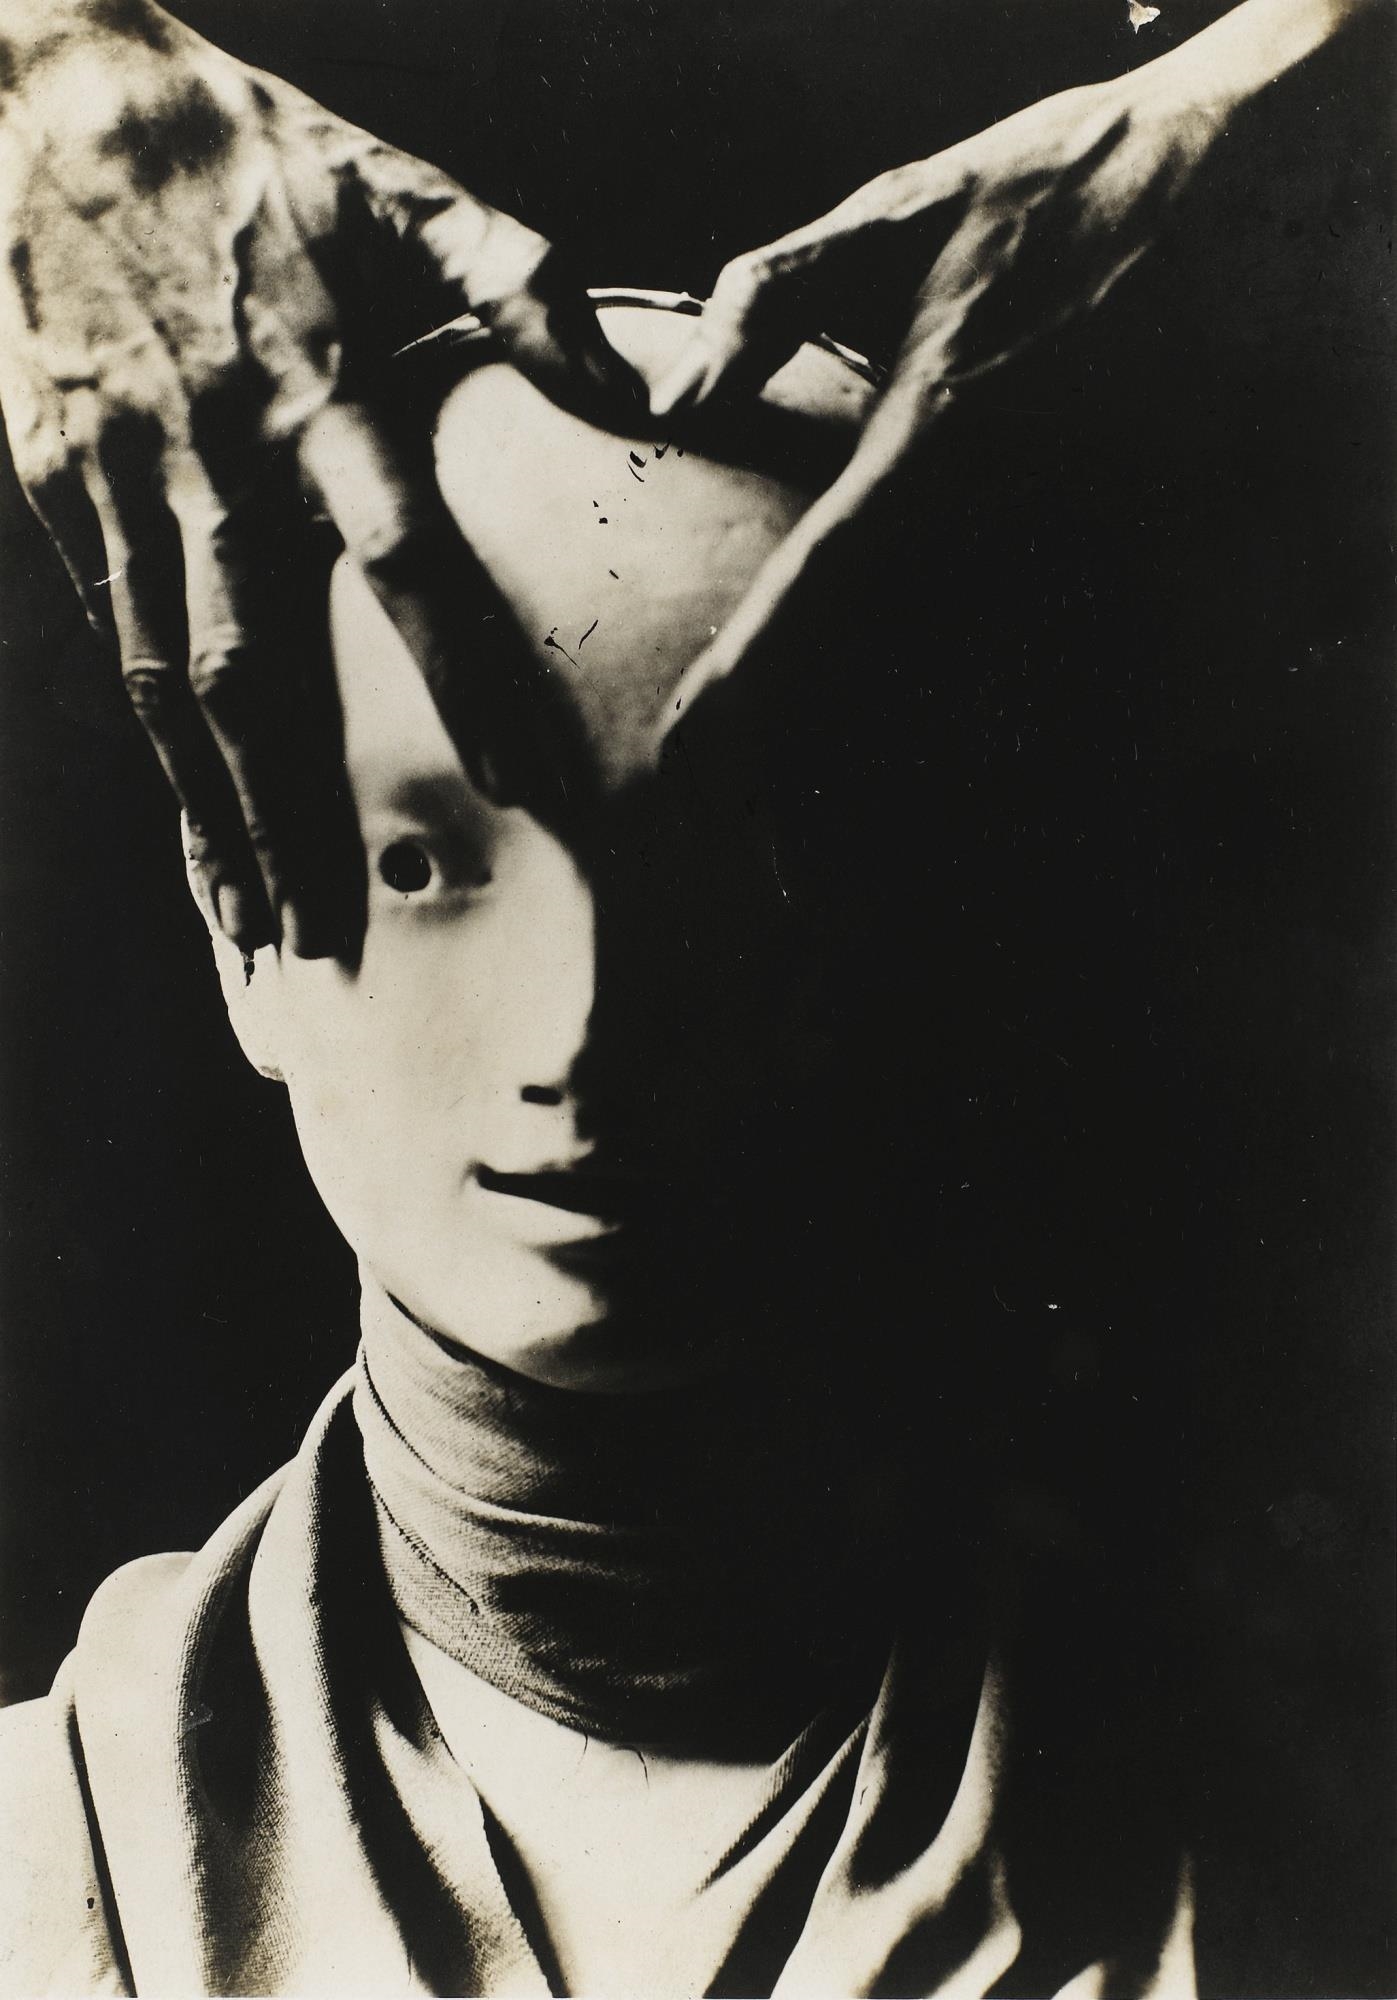 Artwork by Berenice Abbott, COCTEAU’S HANDS ON ANTIGONE MASK, Made of vintage silver print mounted on card